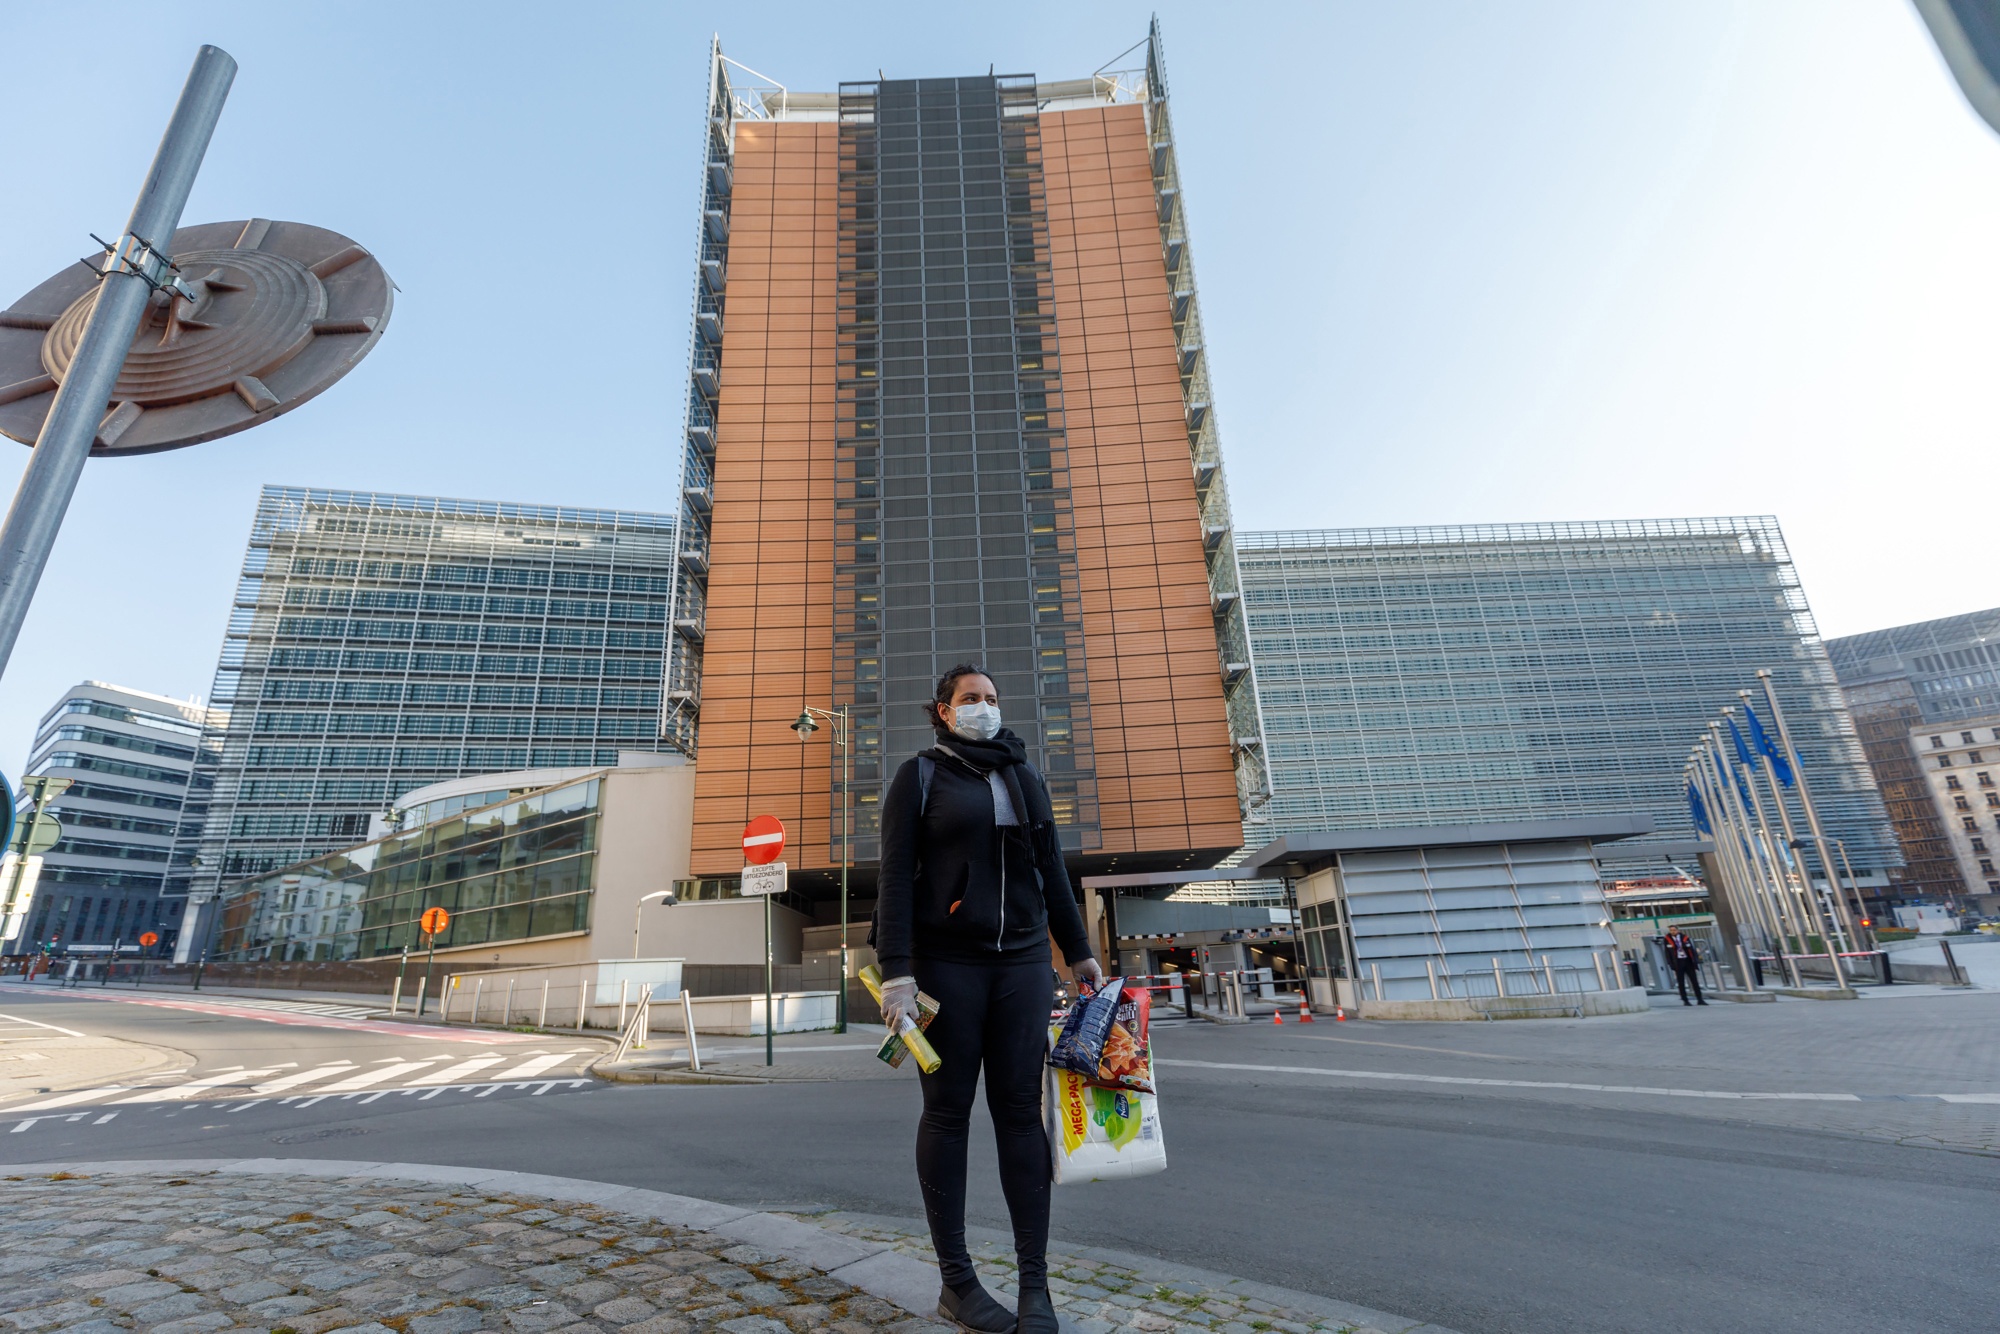 A shopper wearing a protective face mask carries groceries outside the Berlaymont building, which houses offices of the European Commission, in Brussels on March 26.